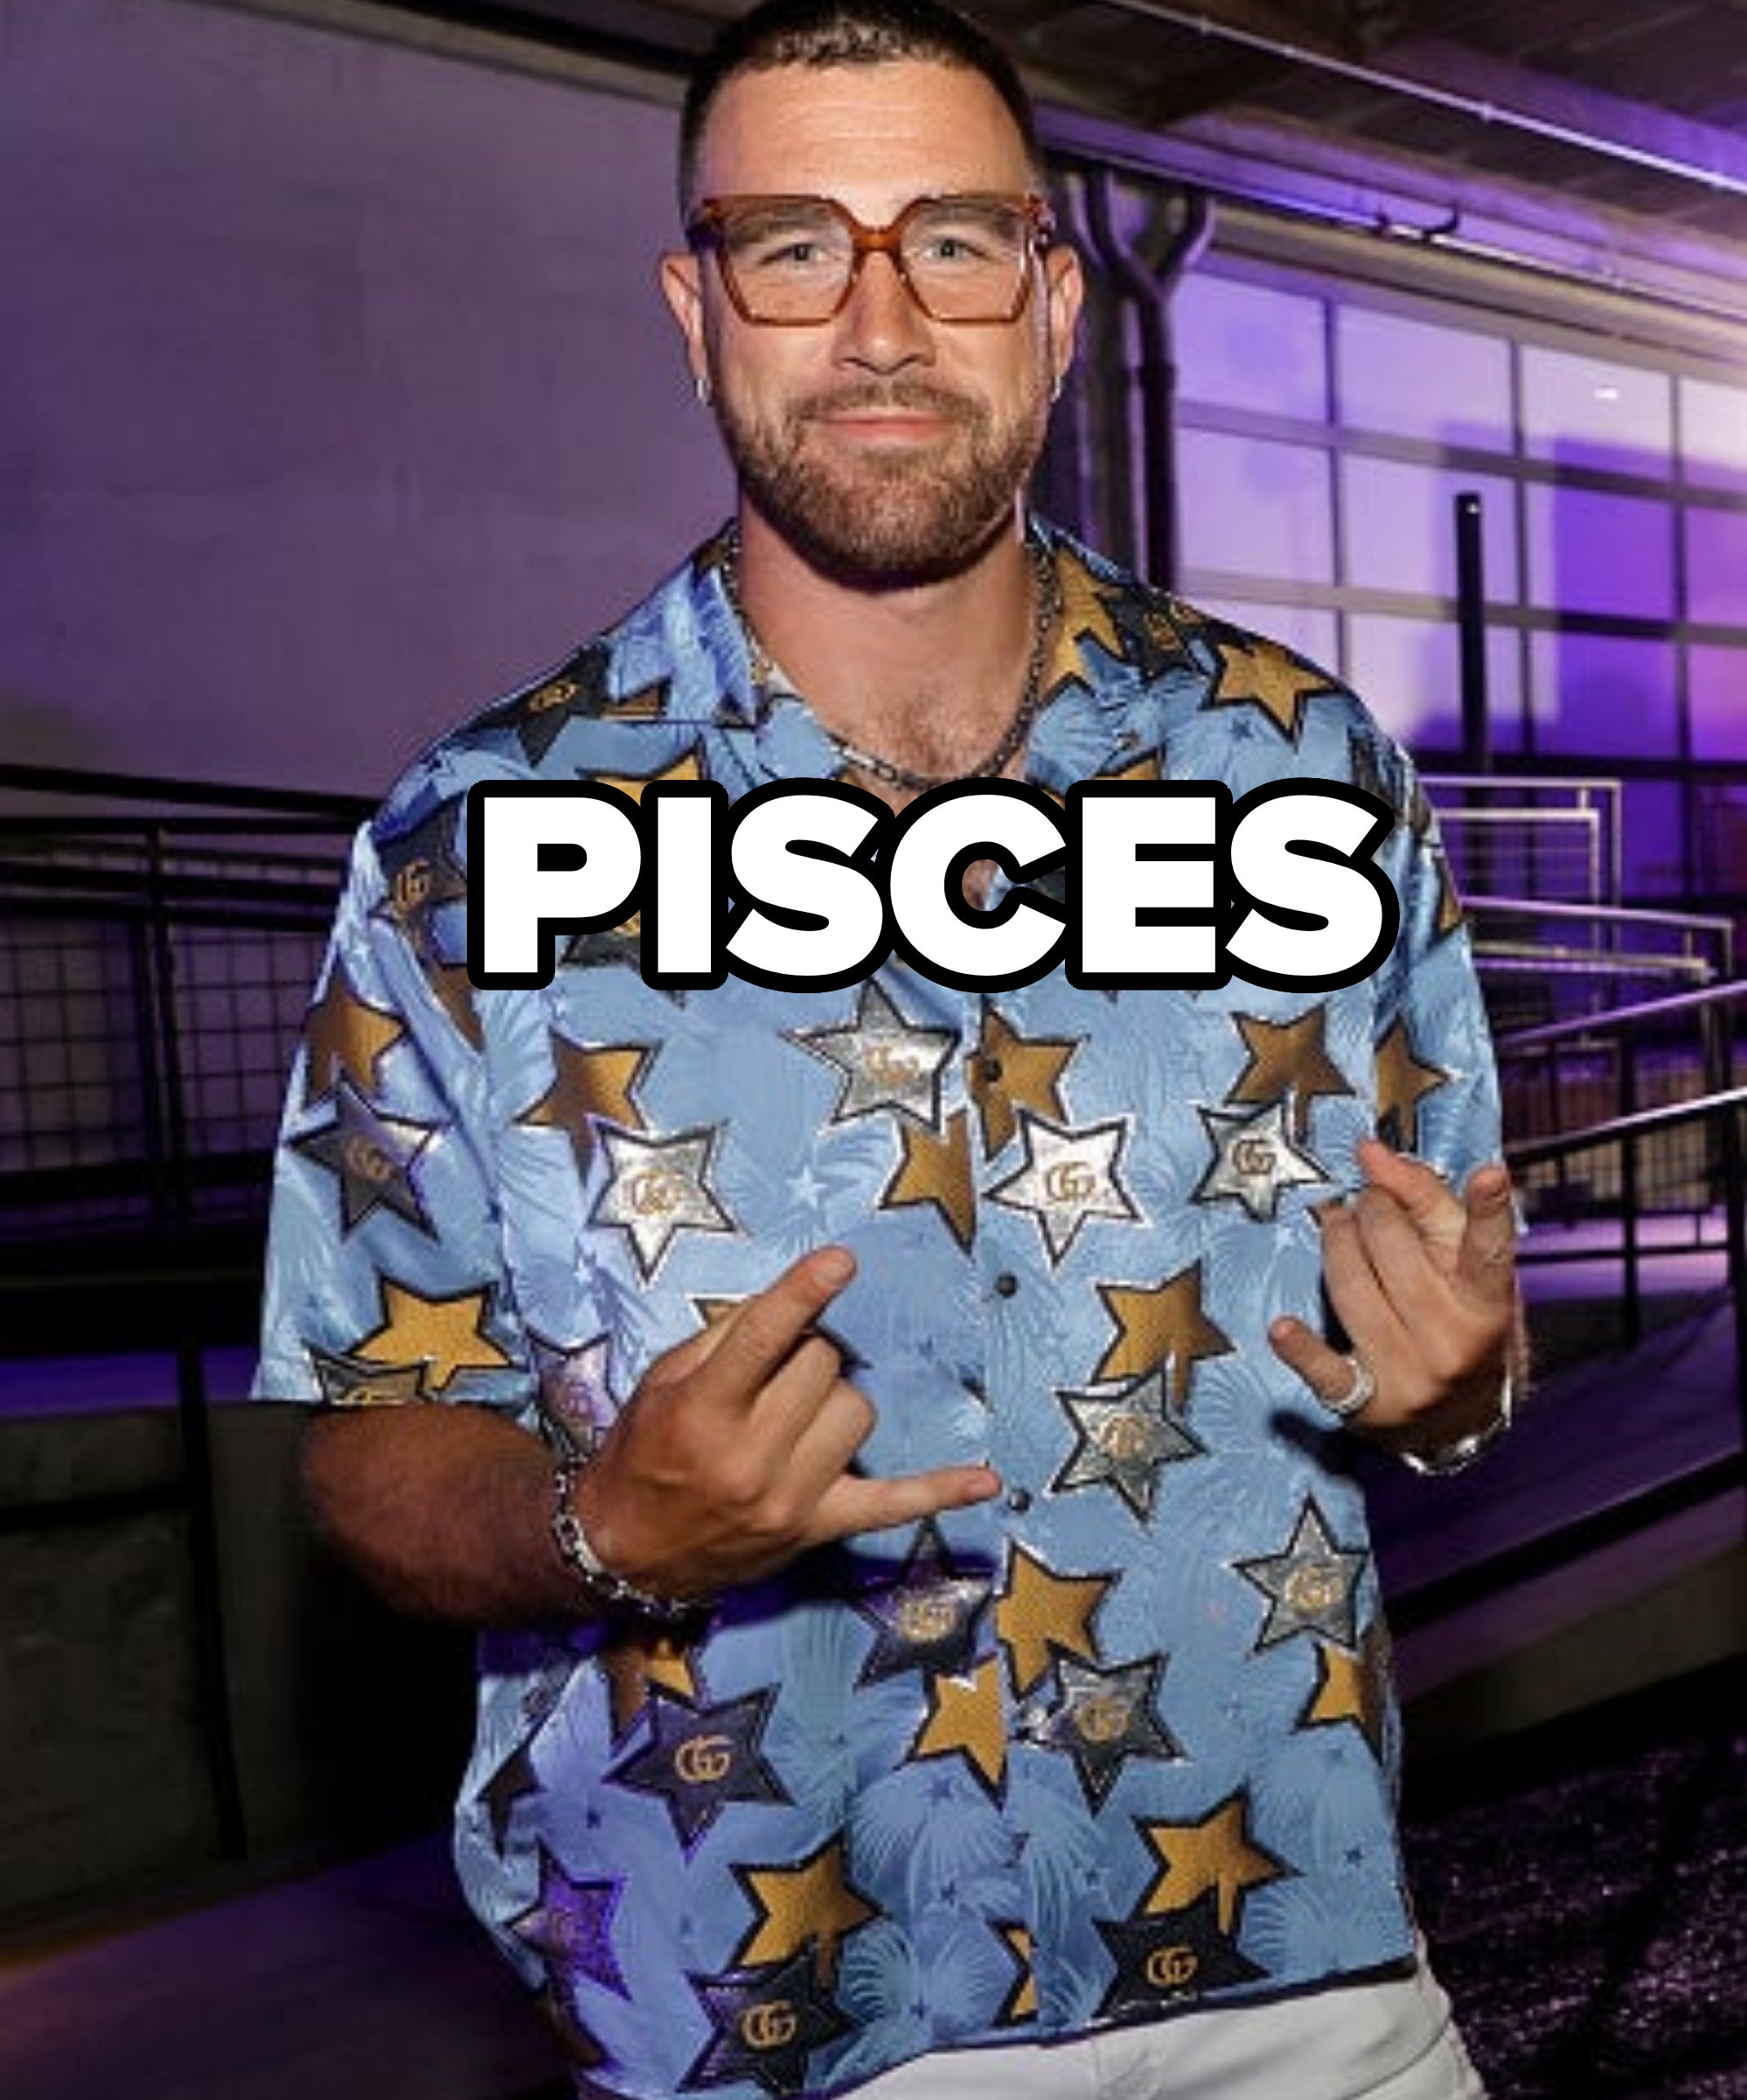 pisces written over a photo of him smiling in a star-printed shirt wearing large seeing glasses